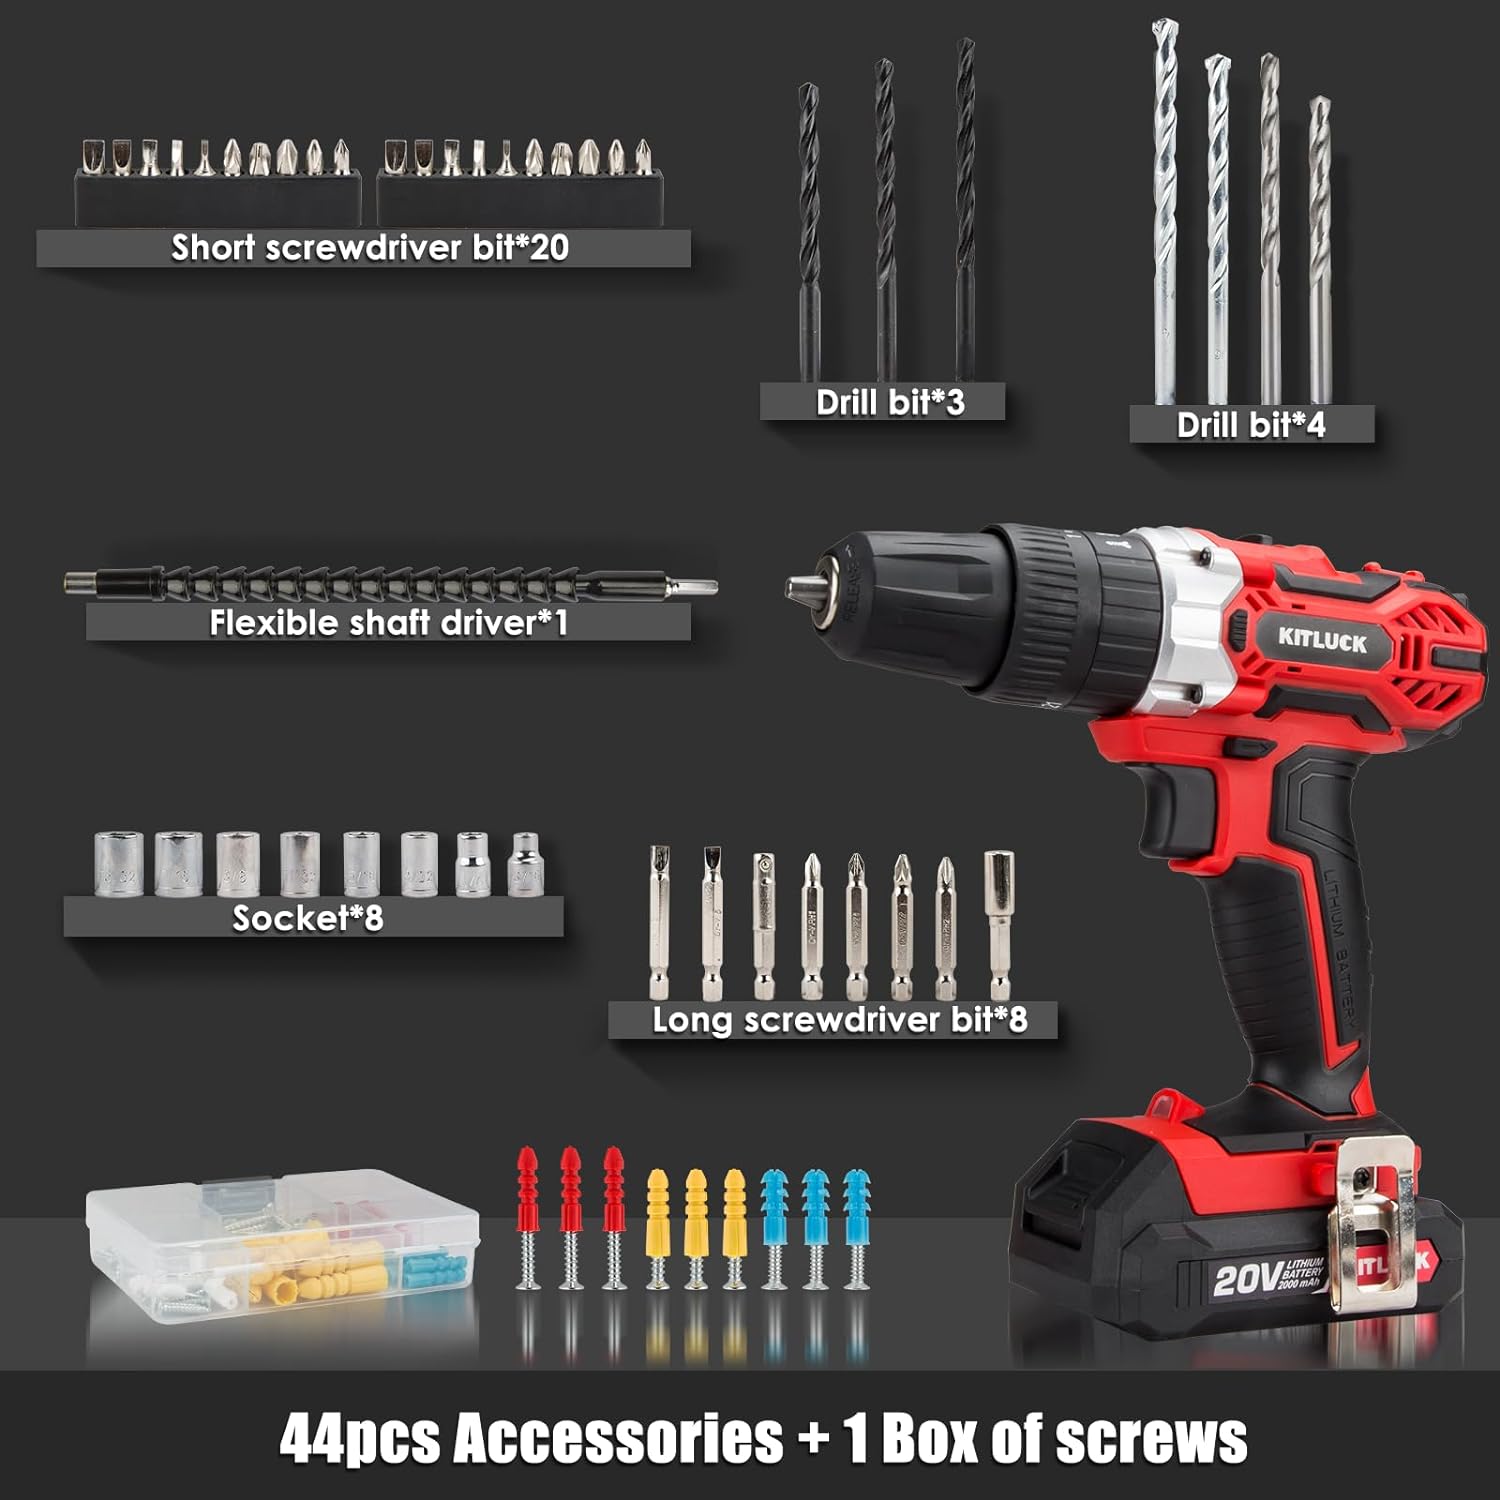 Kitluck Cordless Drill Set, 20V Power Drill Kit With 2 X 2.0Ah Battery, 44Pcs Drill/Driver Bits, 1 Box Screws, Bubble Level, 3/8 Chuck Electric Drill, 32Nm, 21+3 Position, 2 Variable Speed